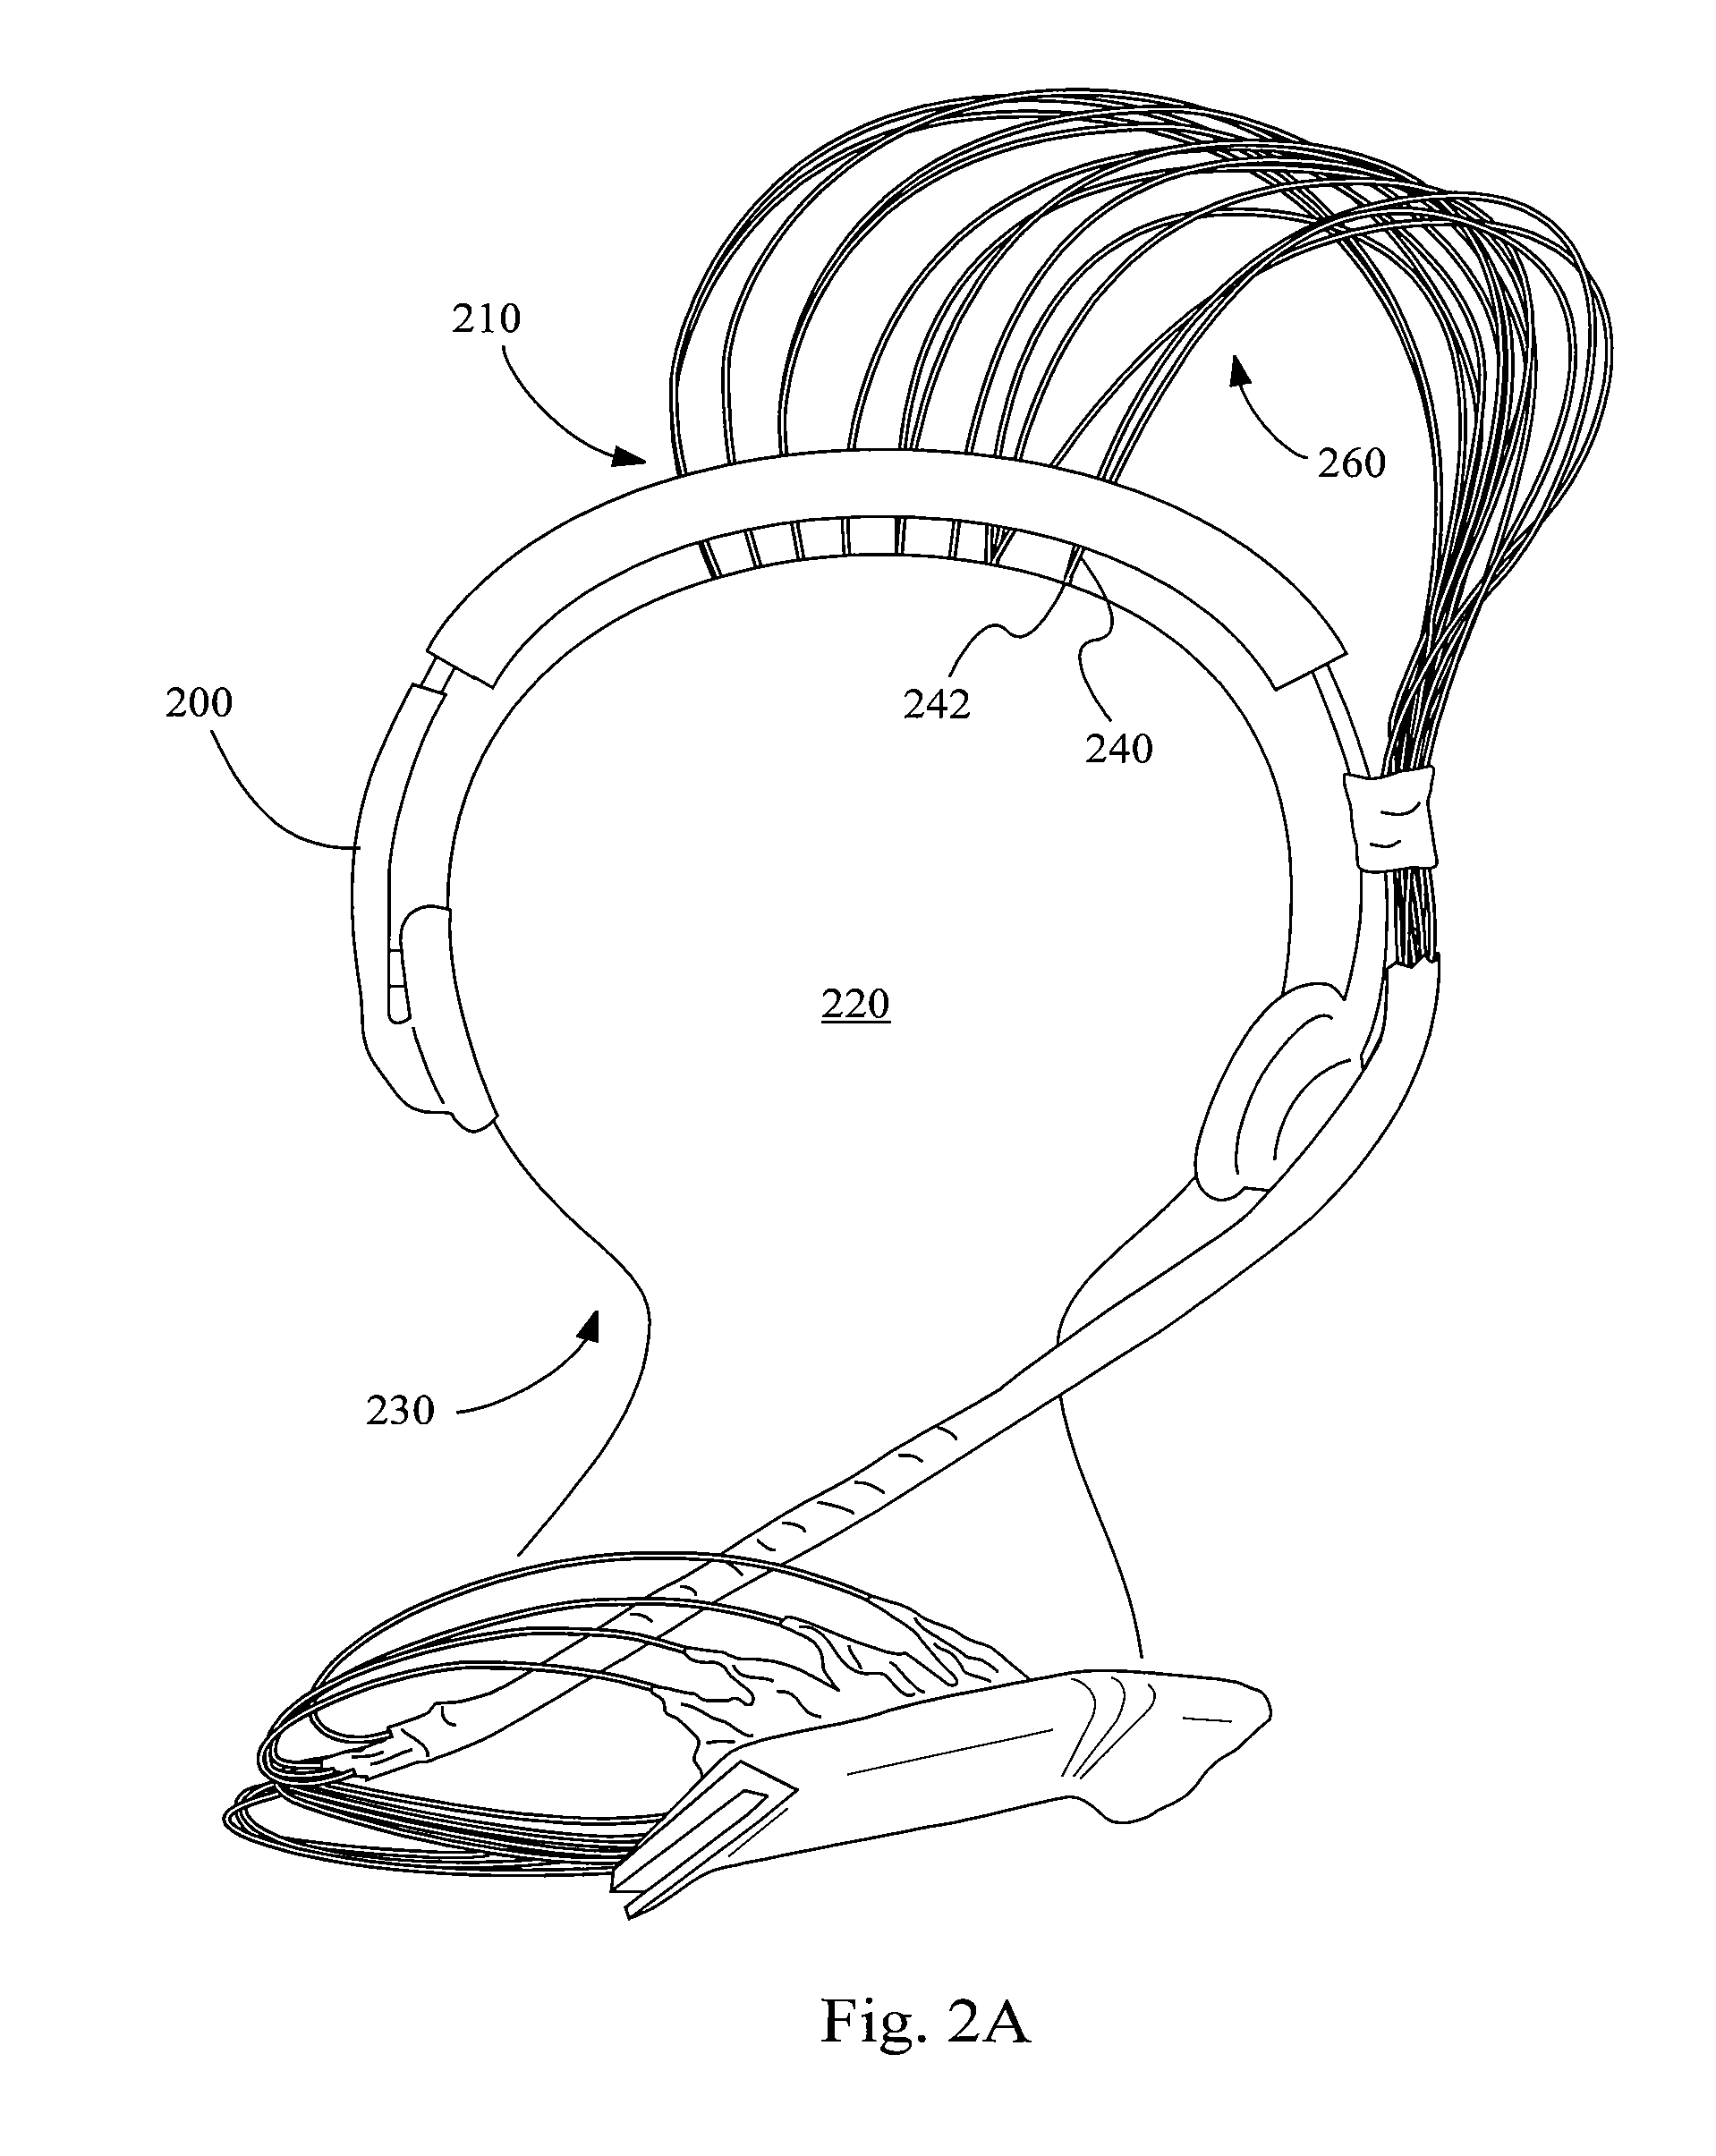 Brain imaging system and methods for direct prosthesis control